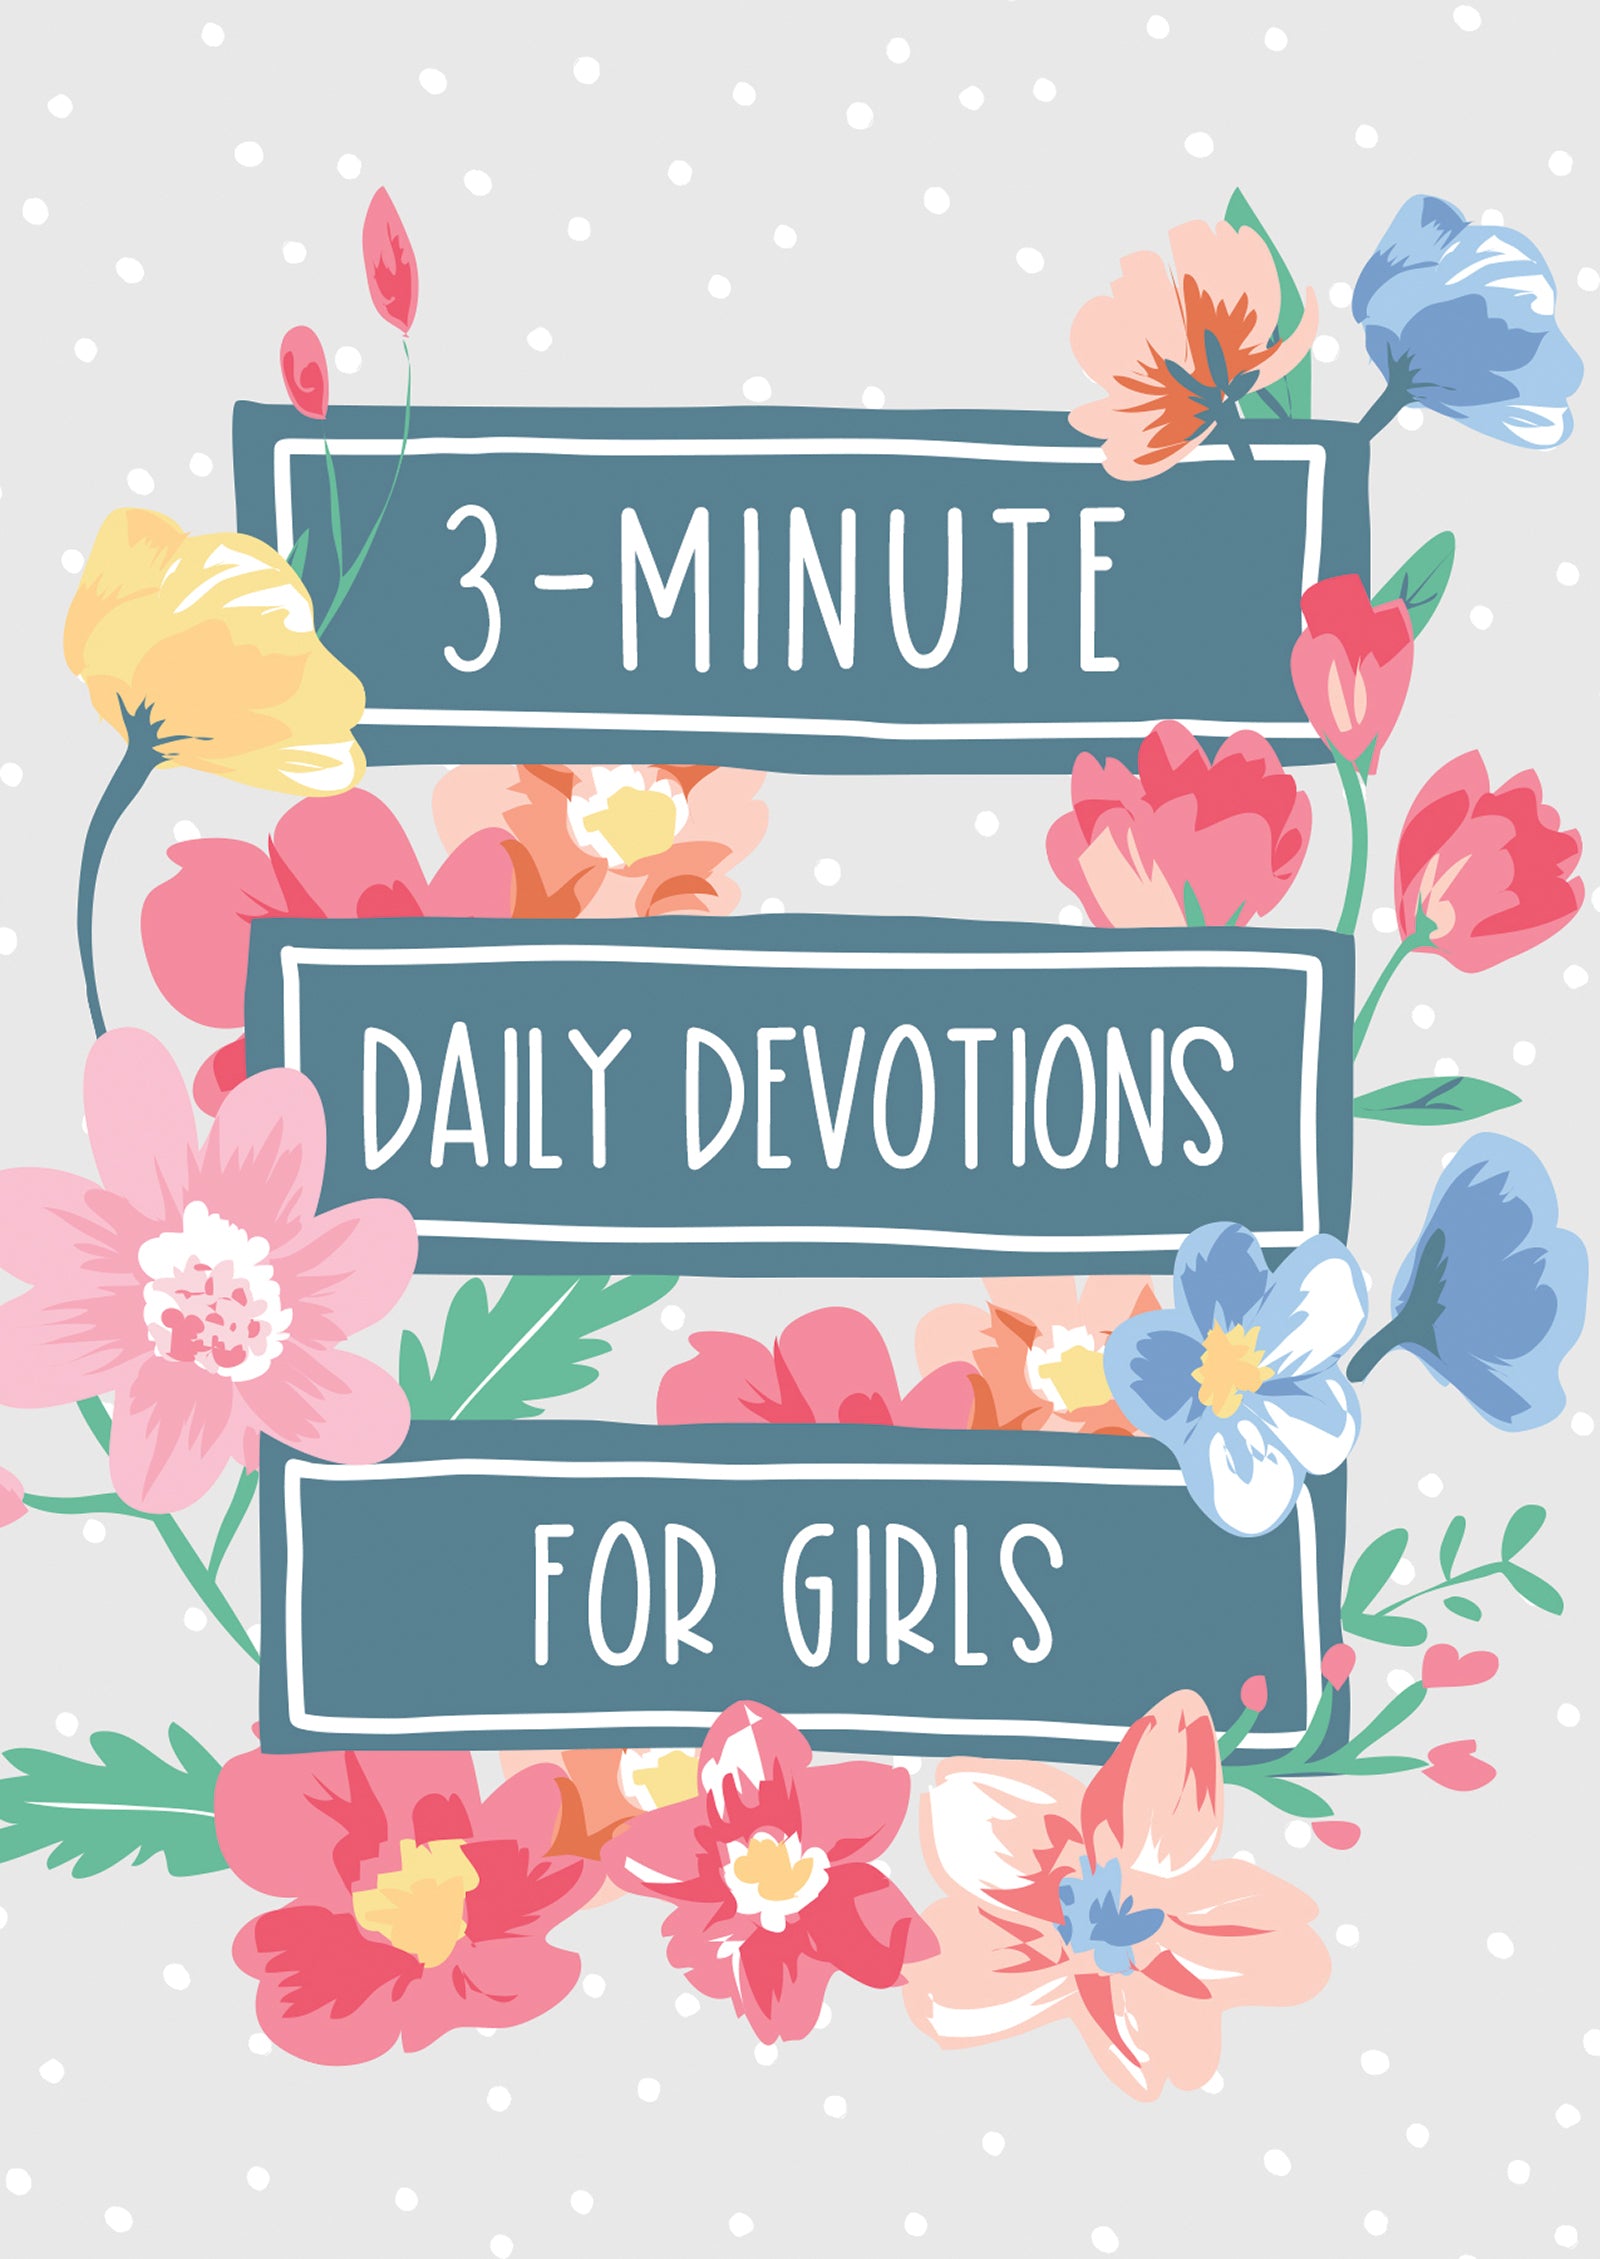 3-Minute Daily Devotions for Girls - The Christian Gift Company